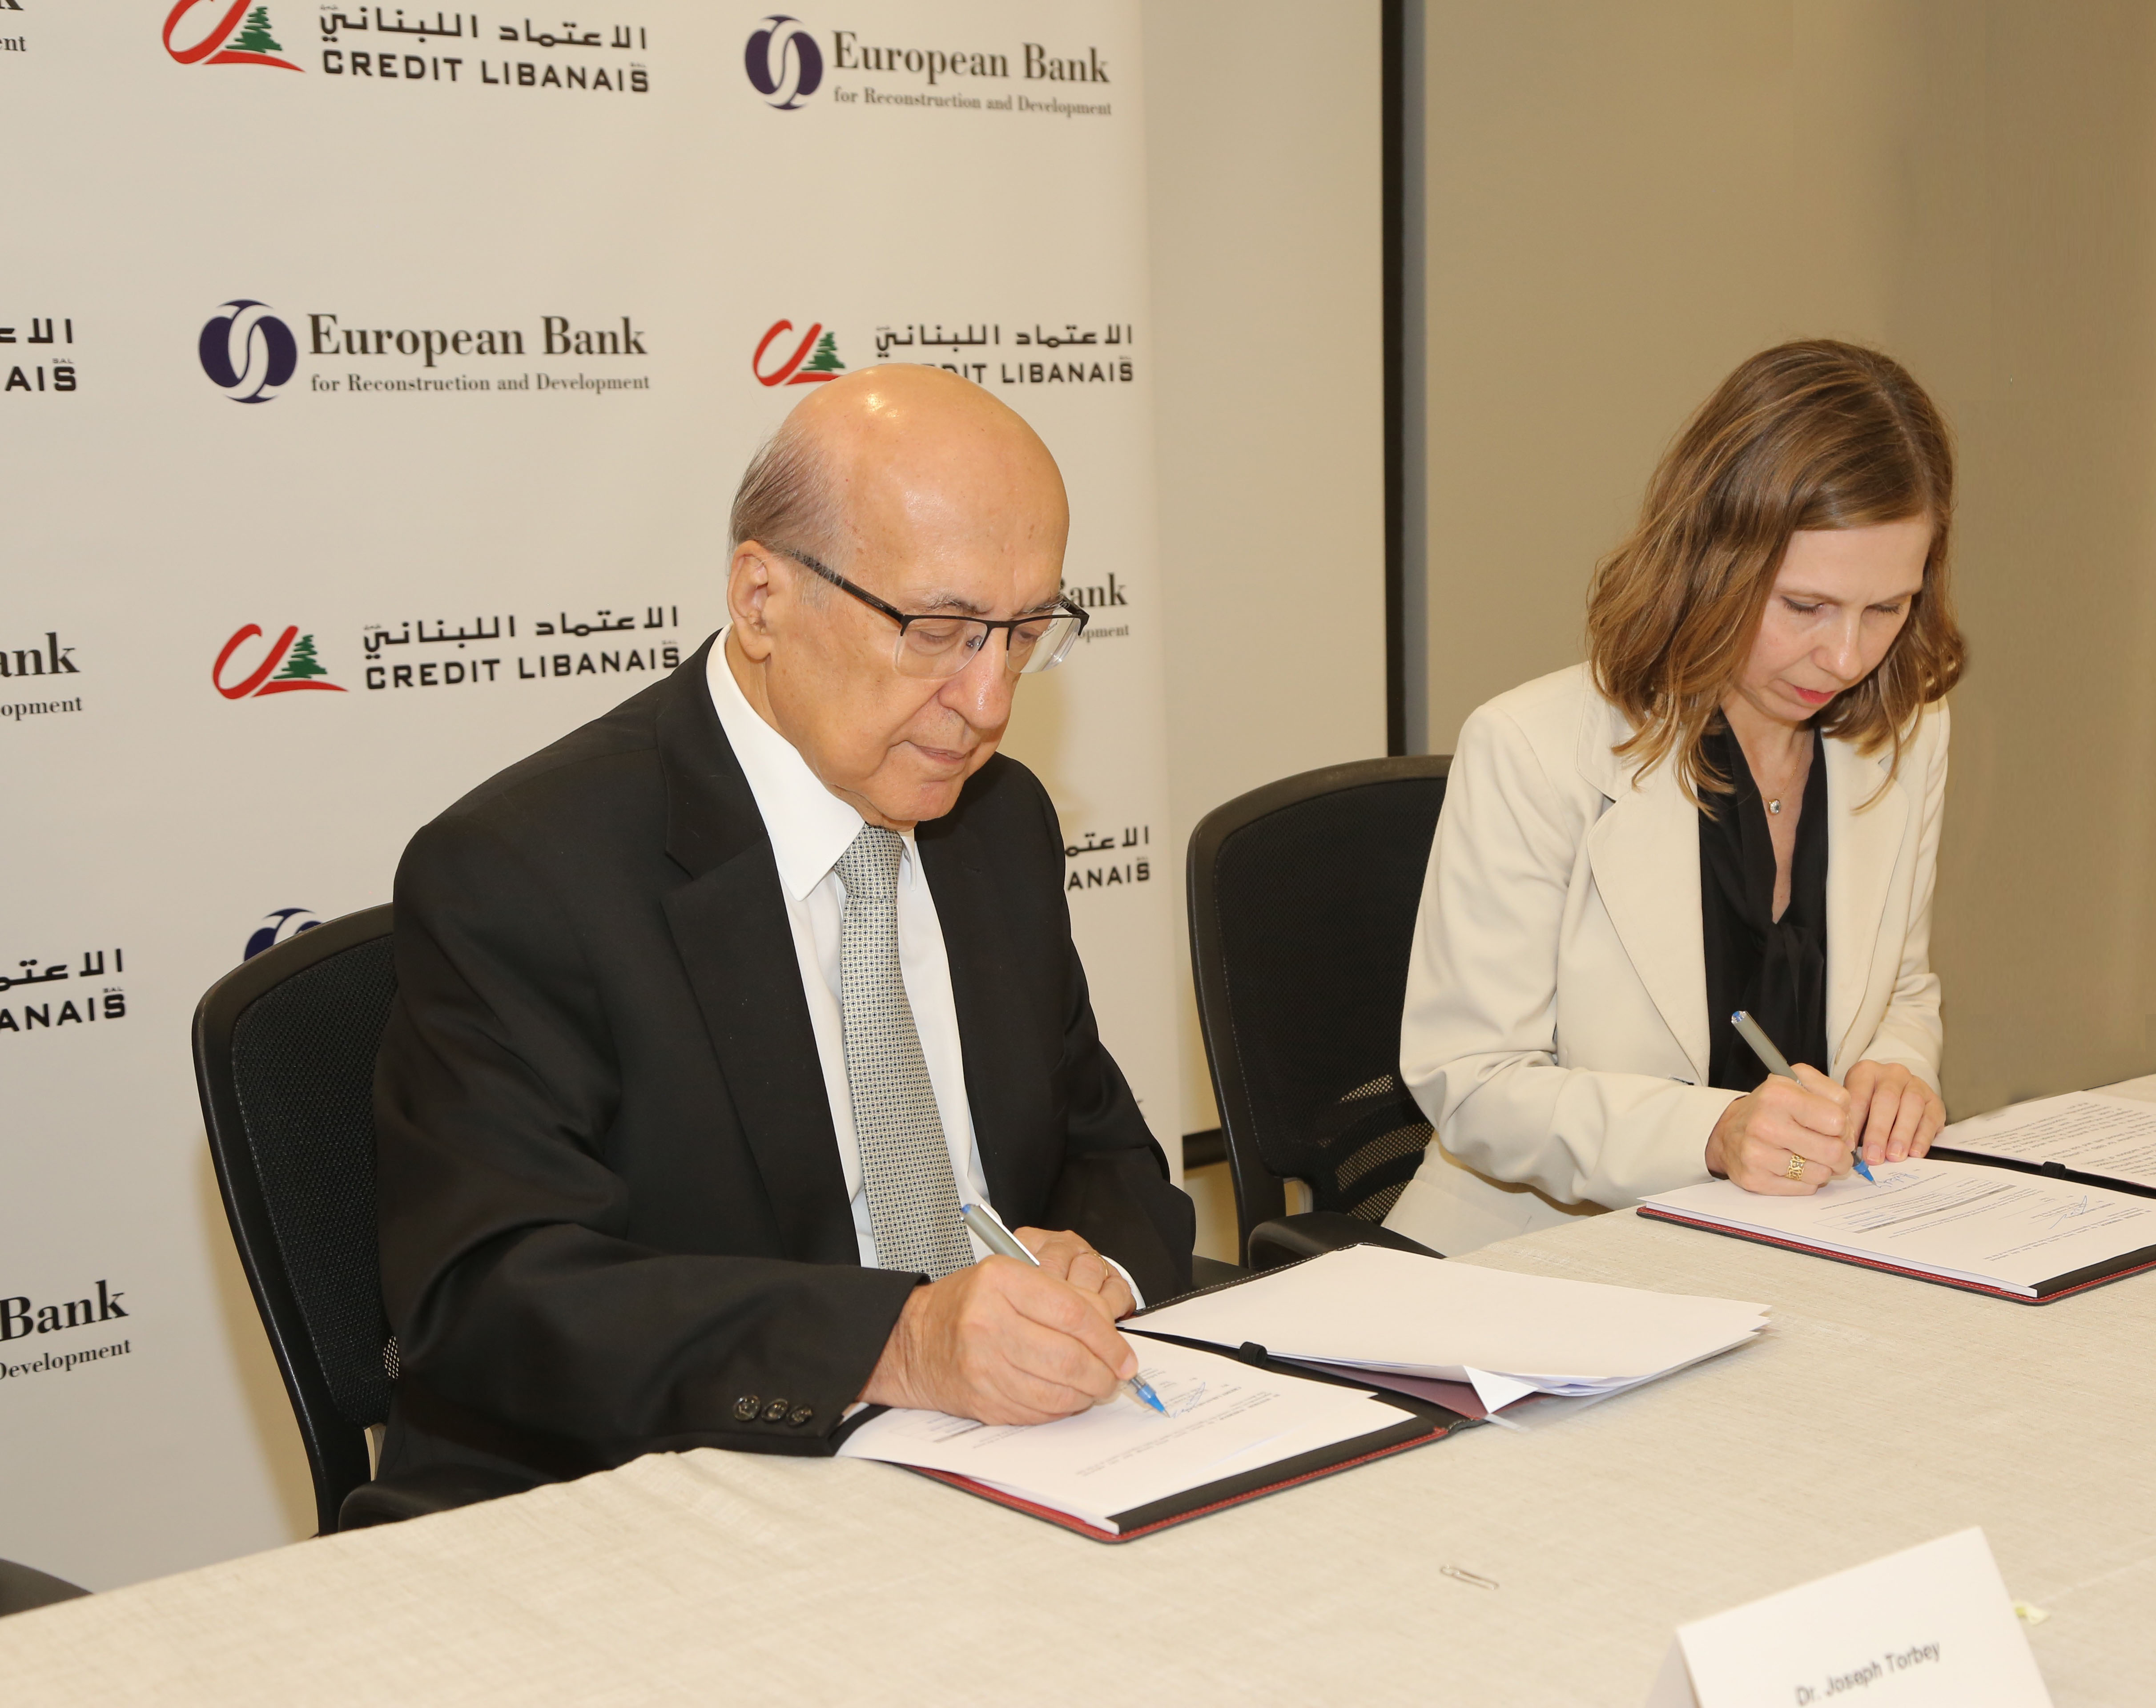 EBRD extends USD 100 Million financing package to Credit Libanais to Finance Small and Medium Enterprises and Cross-Border Trade Finance in Lebanon